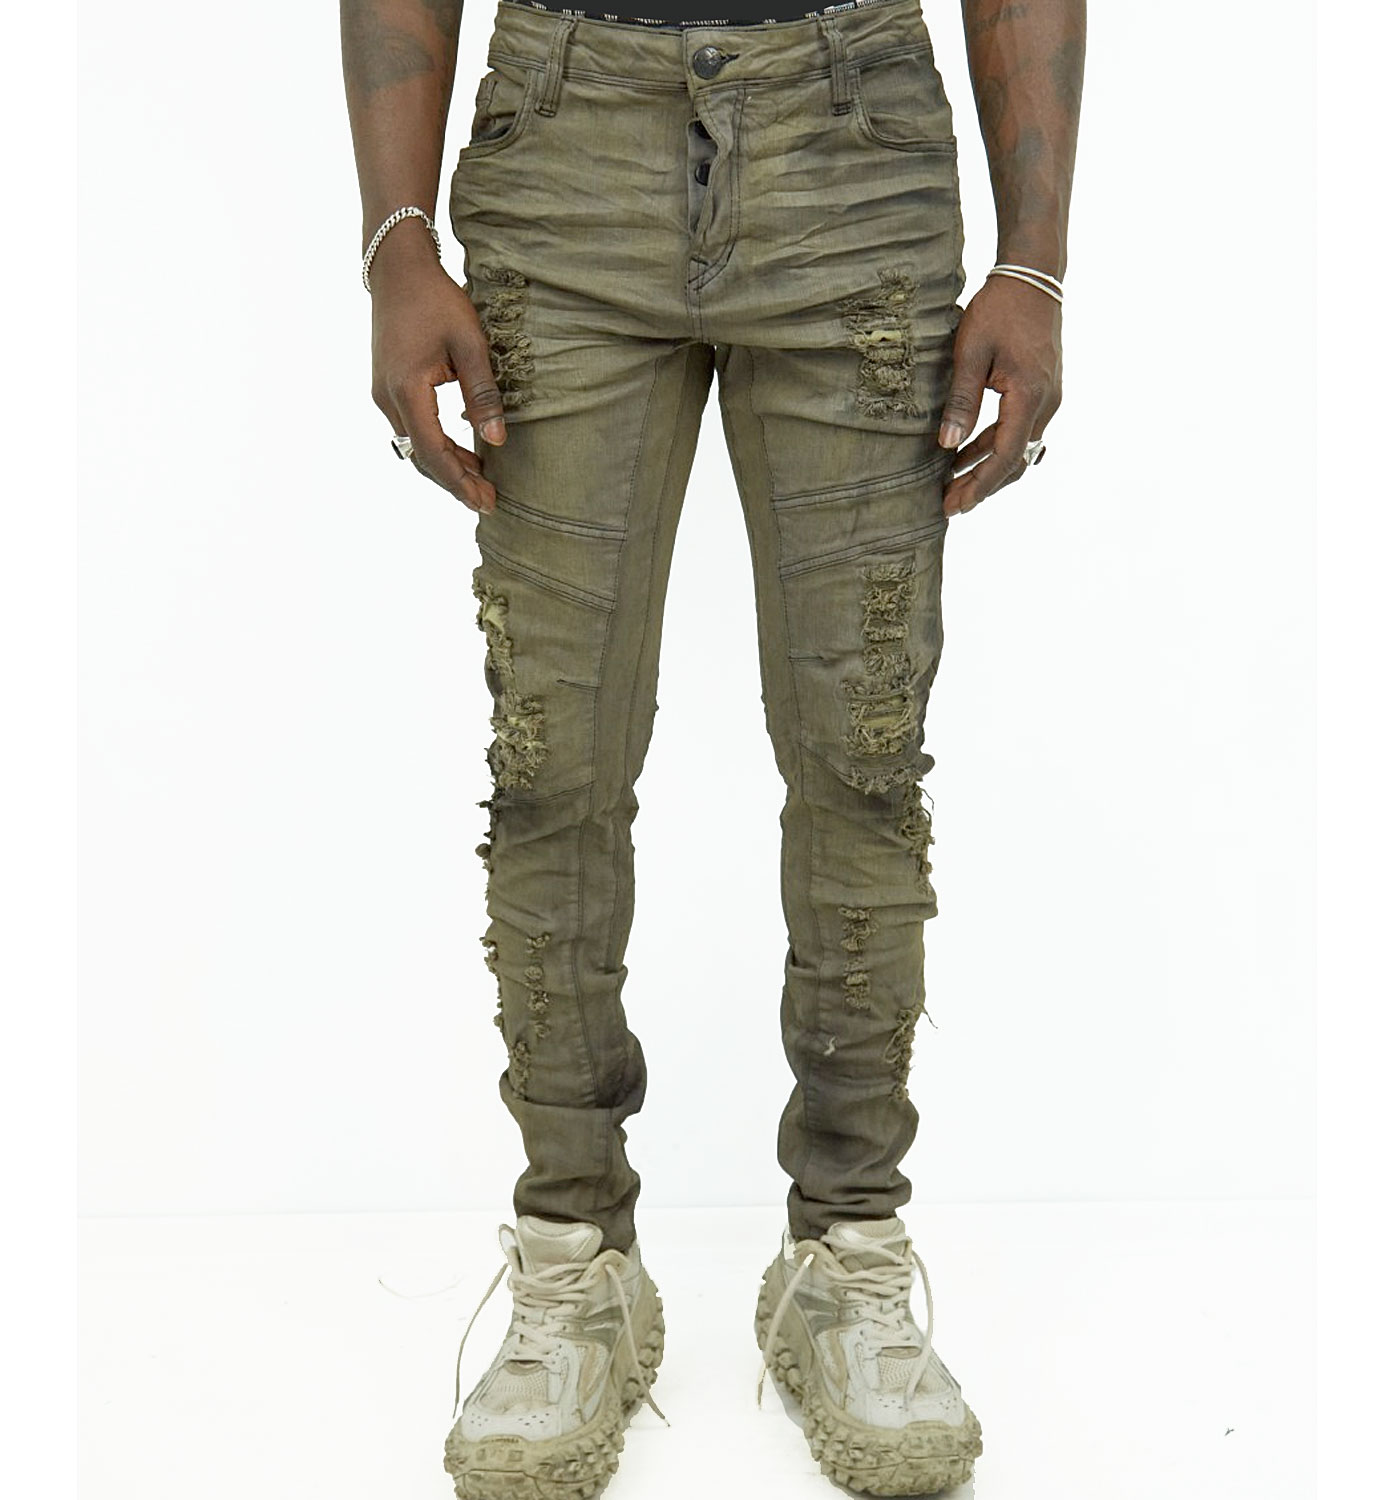 Stealth Apoc Jeans